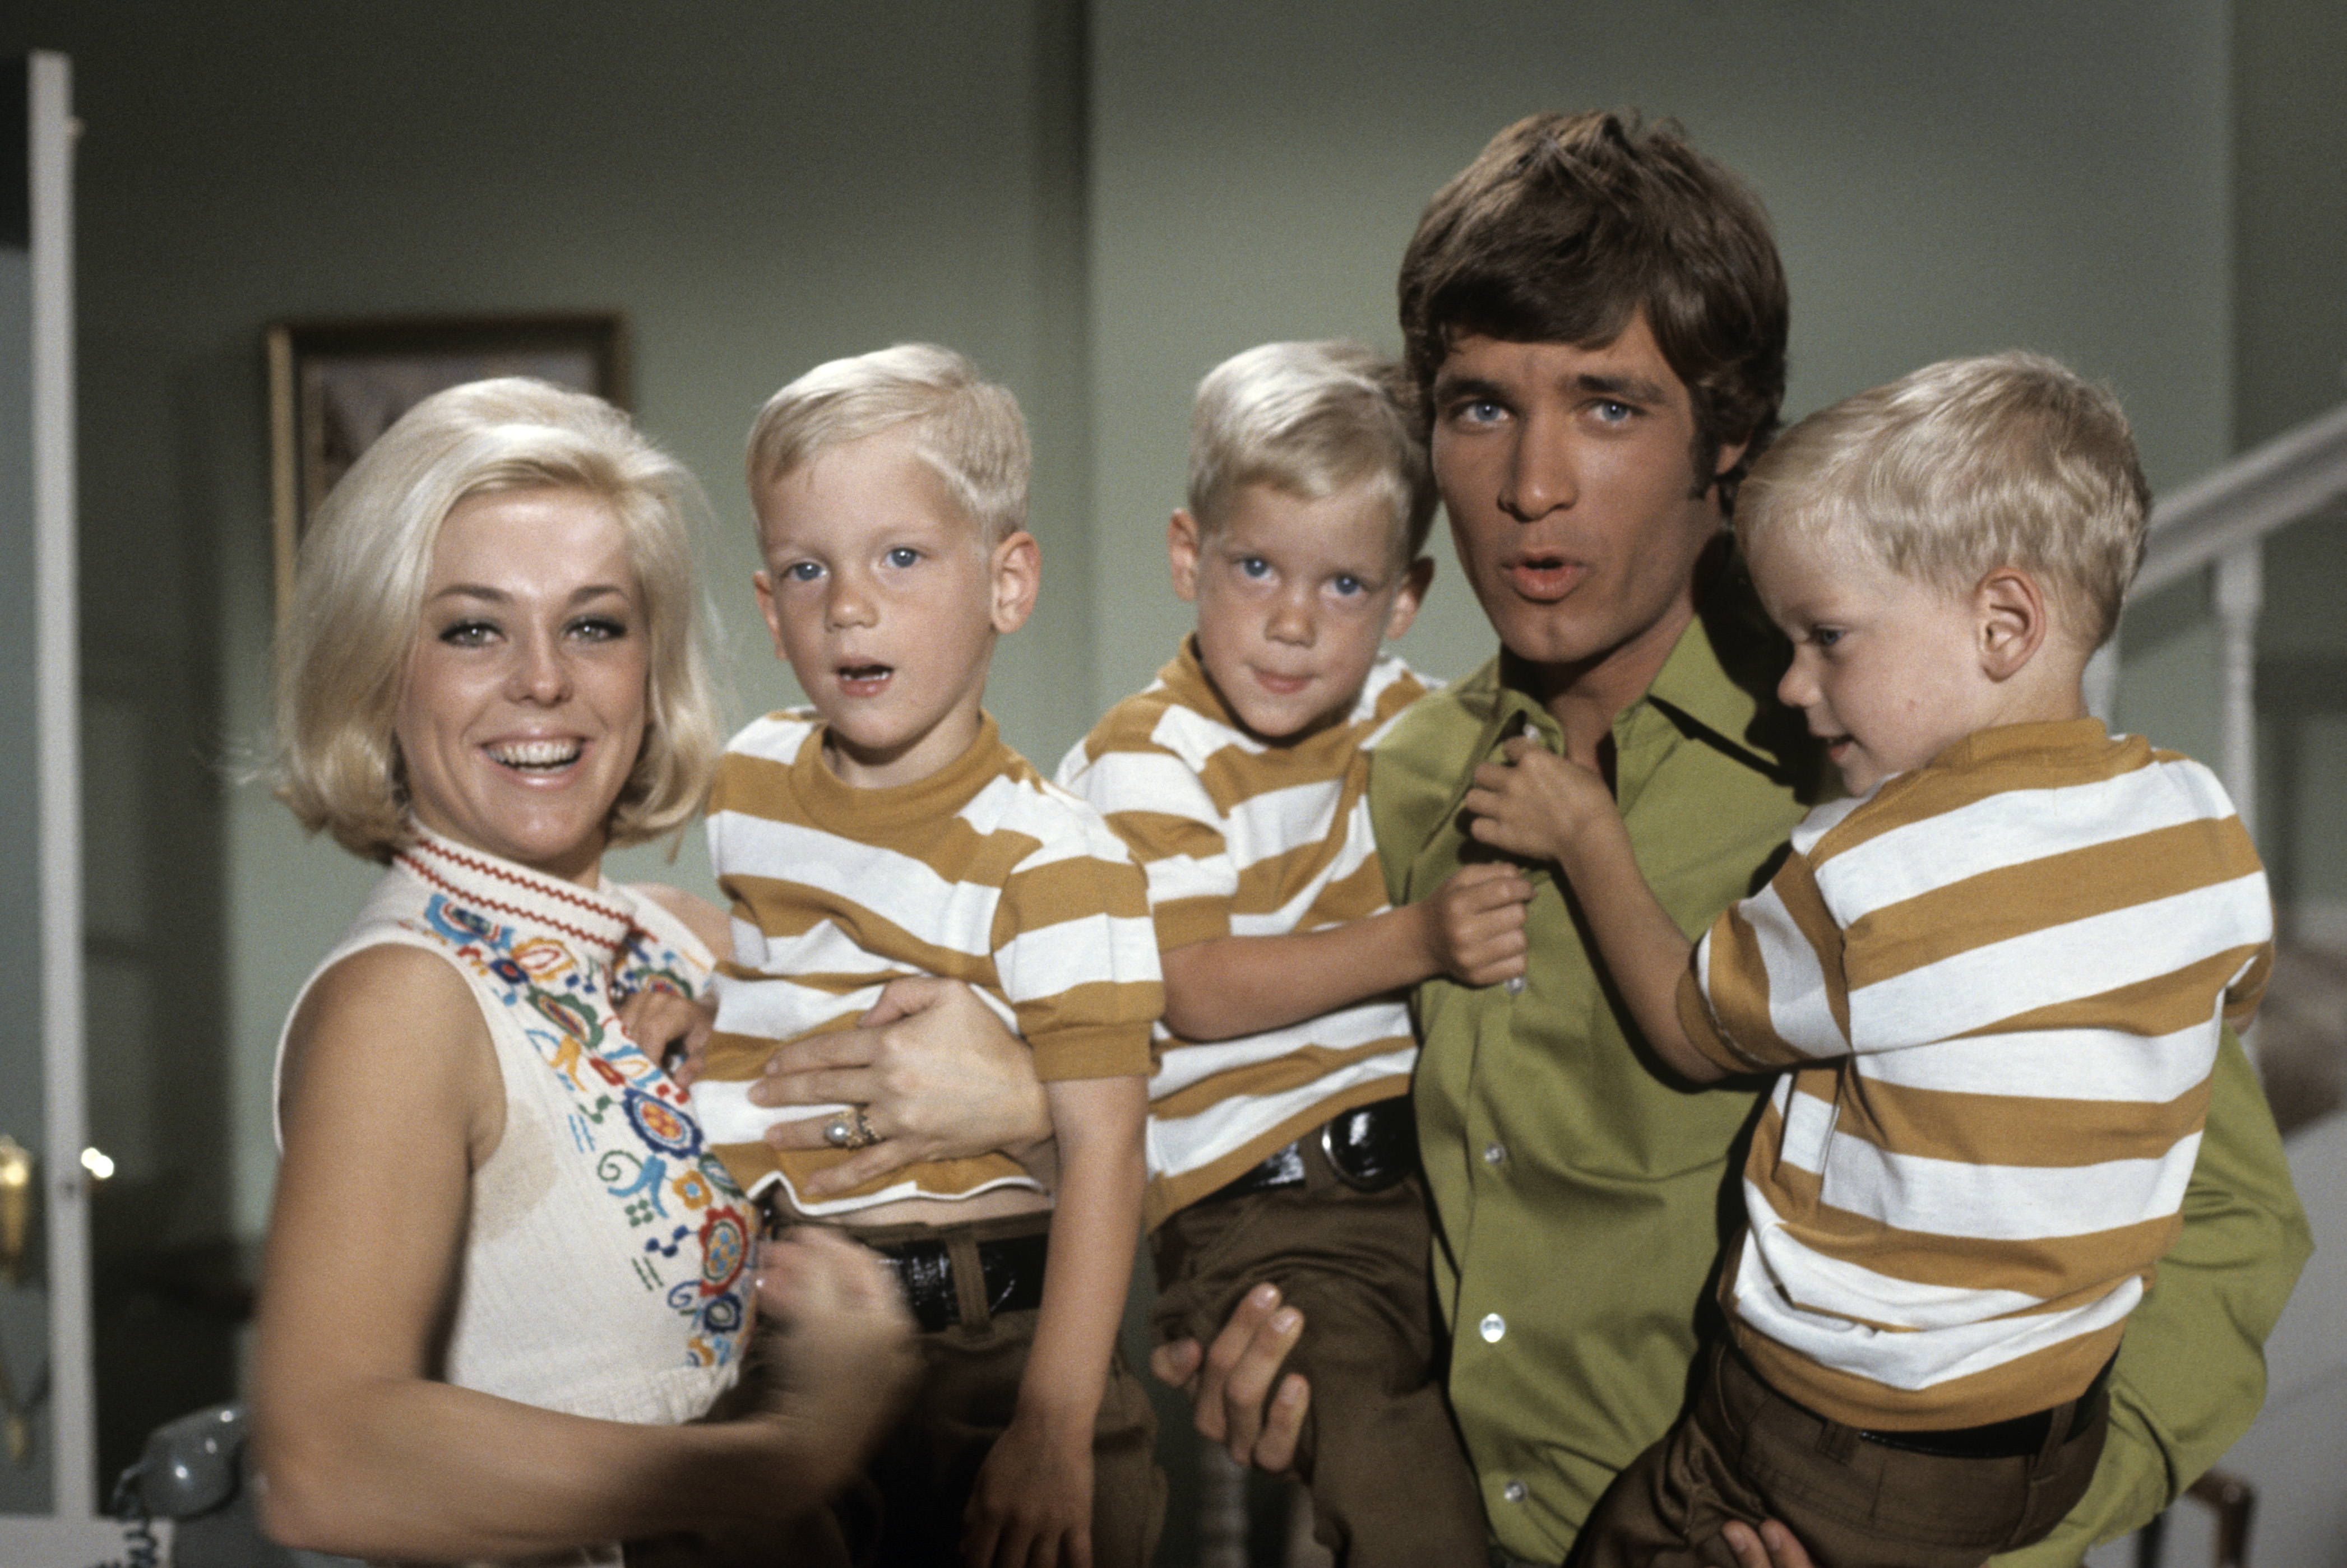 Tina Cole and Don Grady on "My Three Sons" | Source: Getty Images